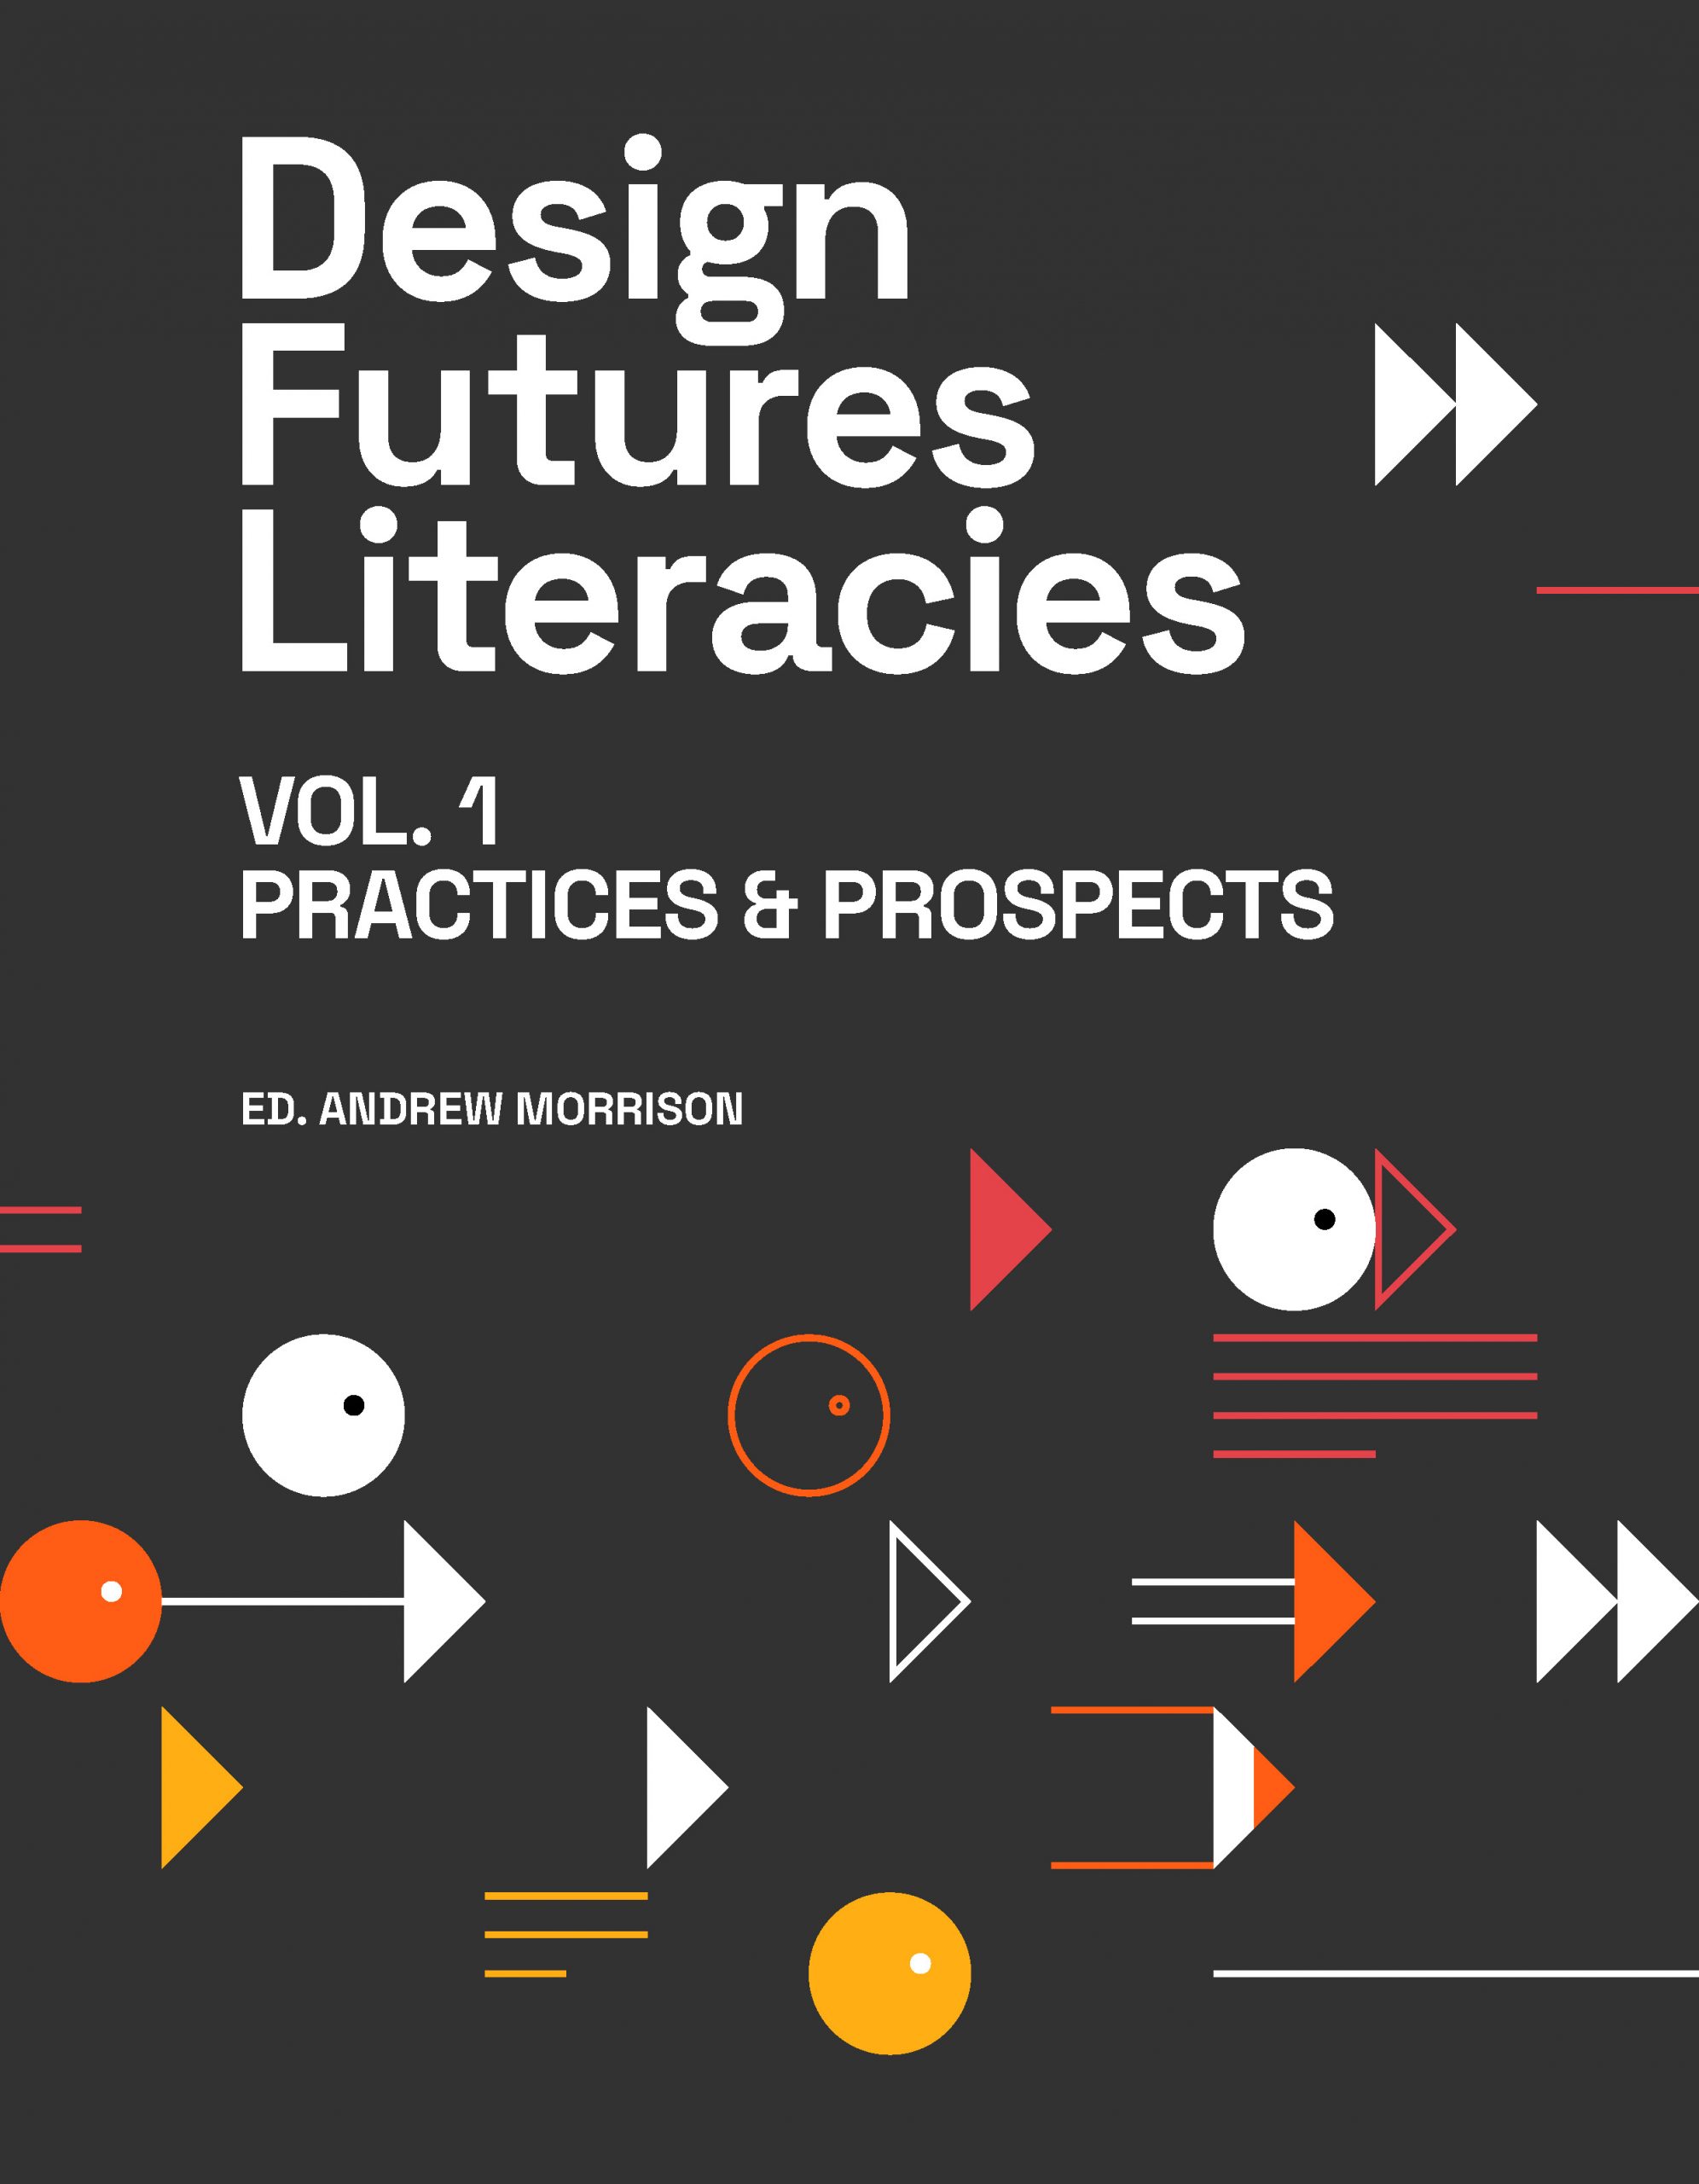 Cover of Design Futures Literacies Volume 1, entitled "Projects and Prospects"